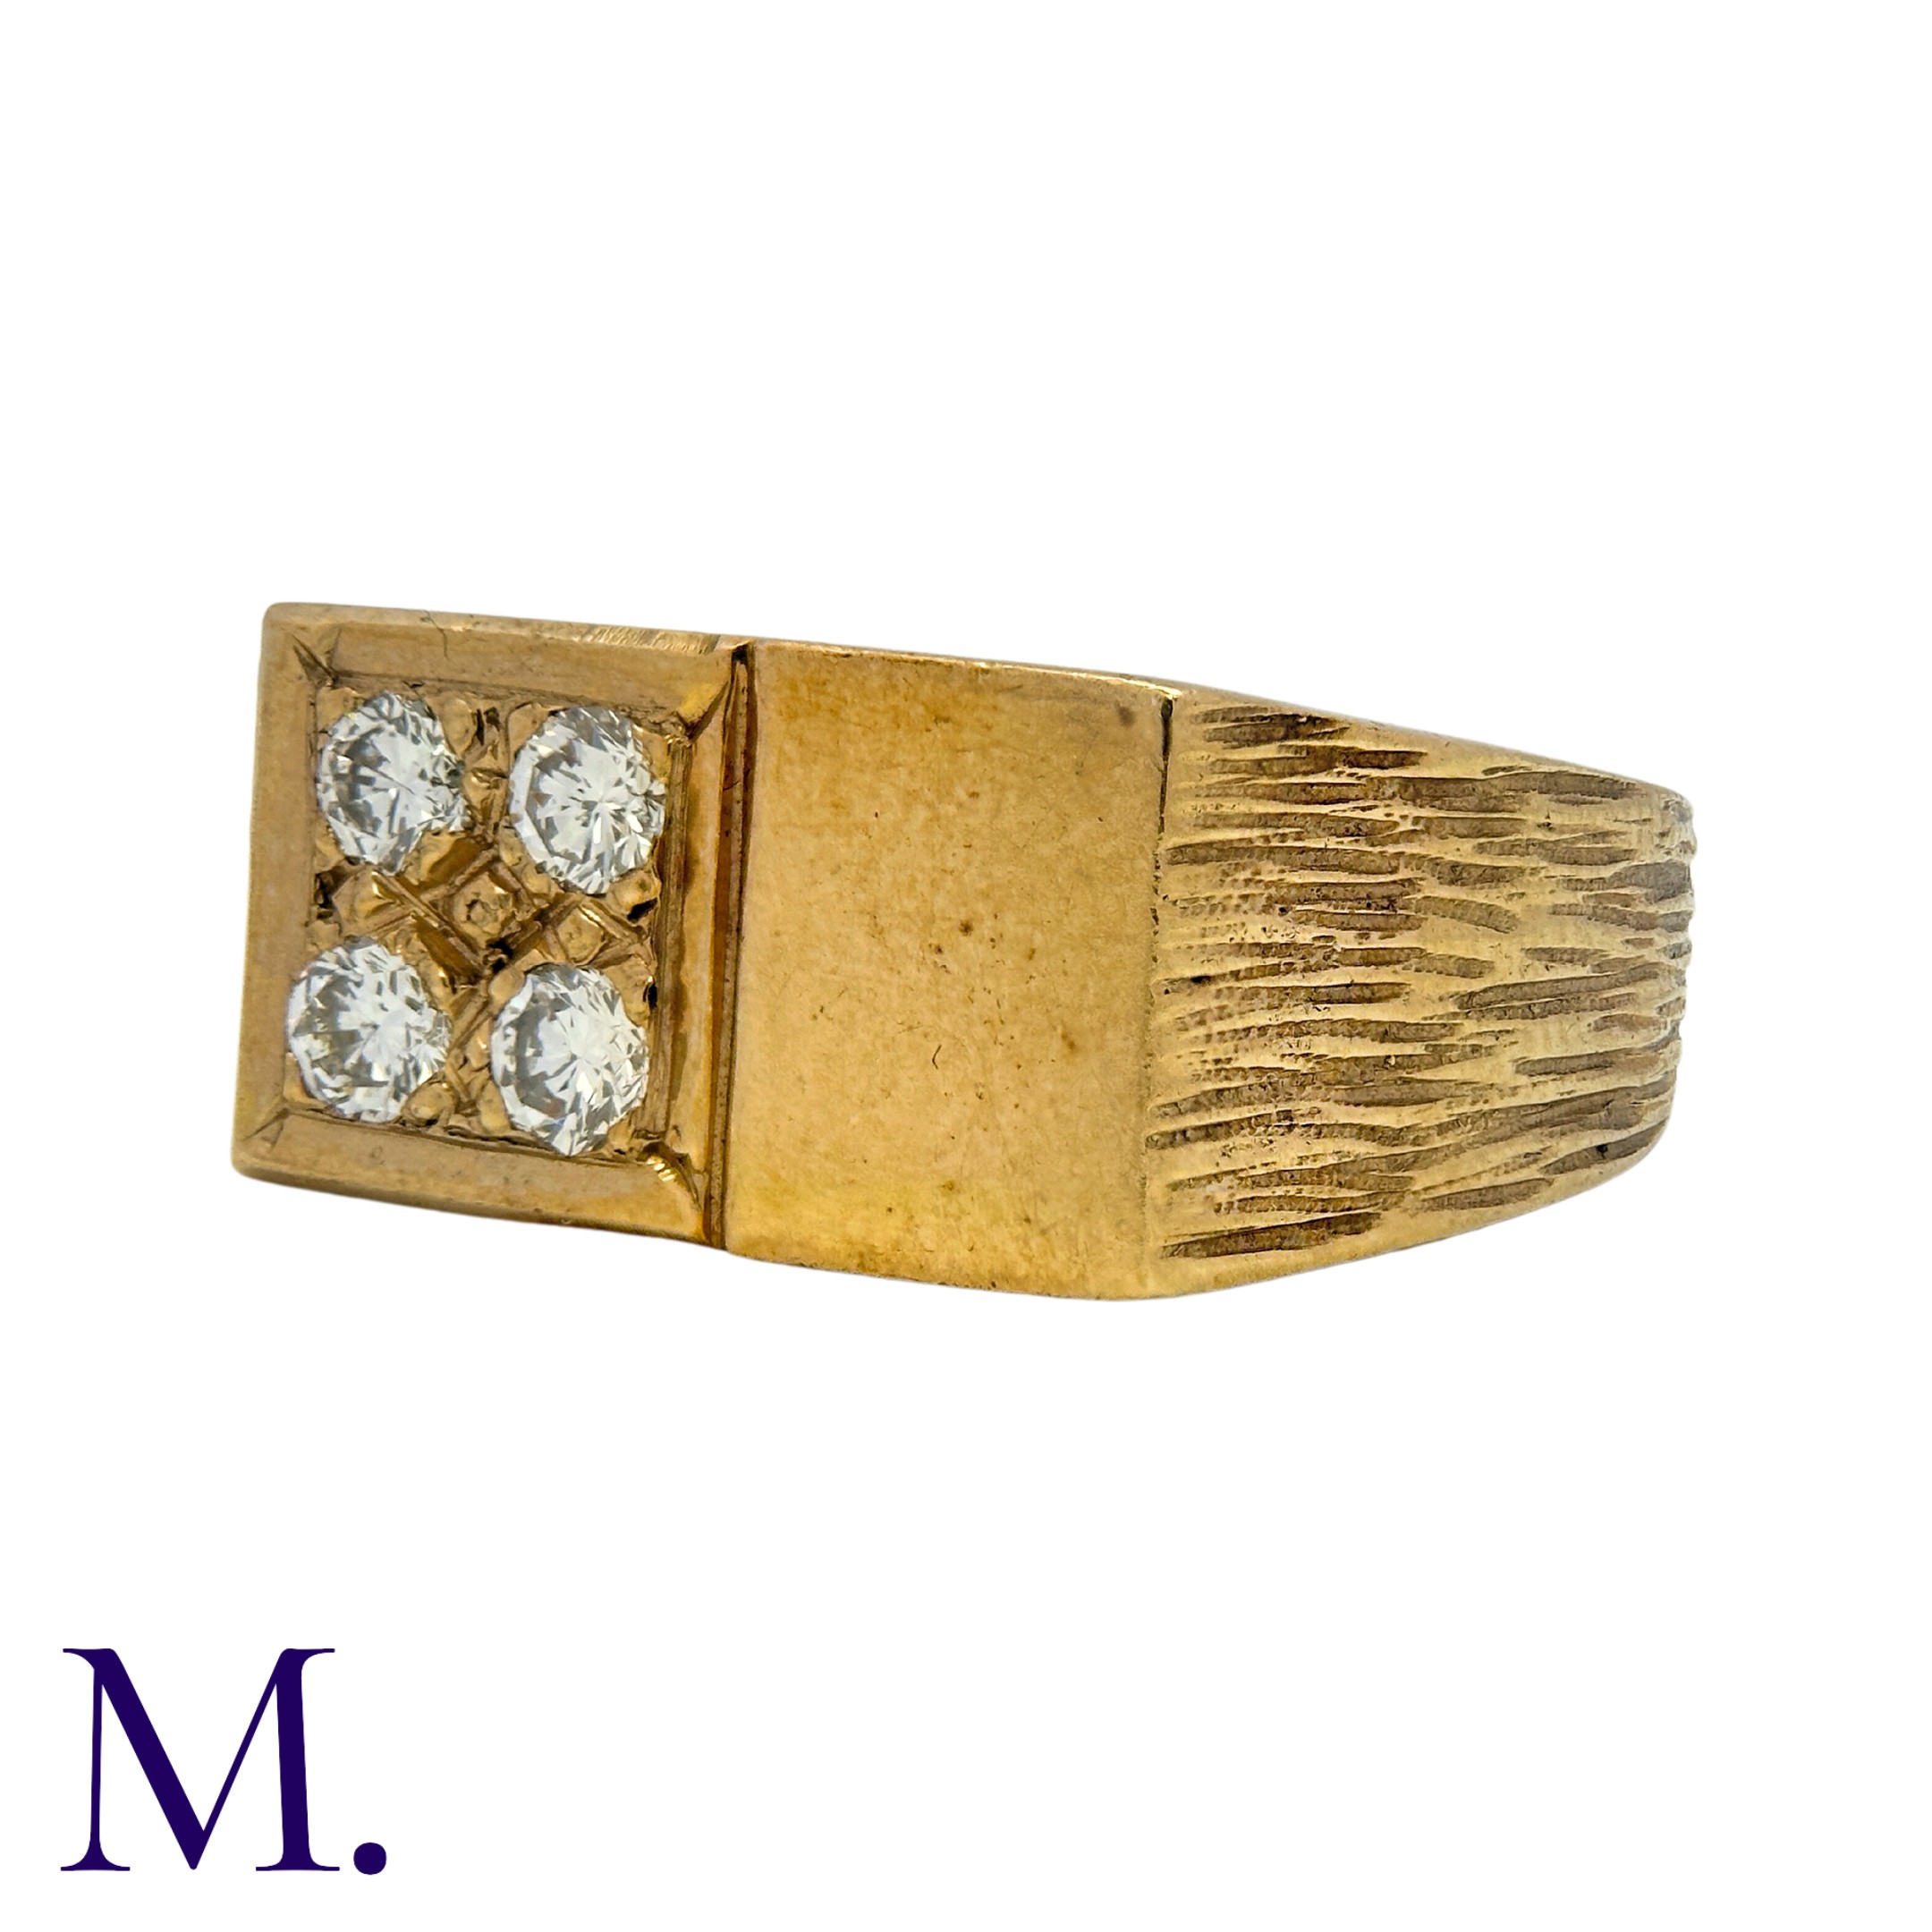 A Diamond-Set Signet Ring in 9K yellow gold, with a rectangular face, half polished and the other